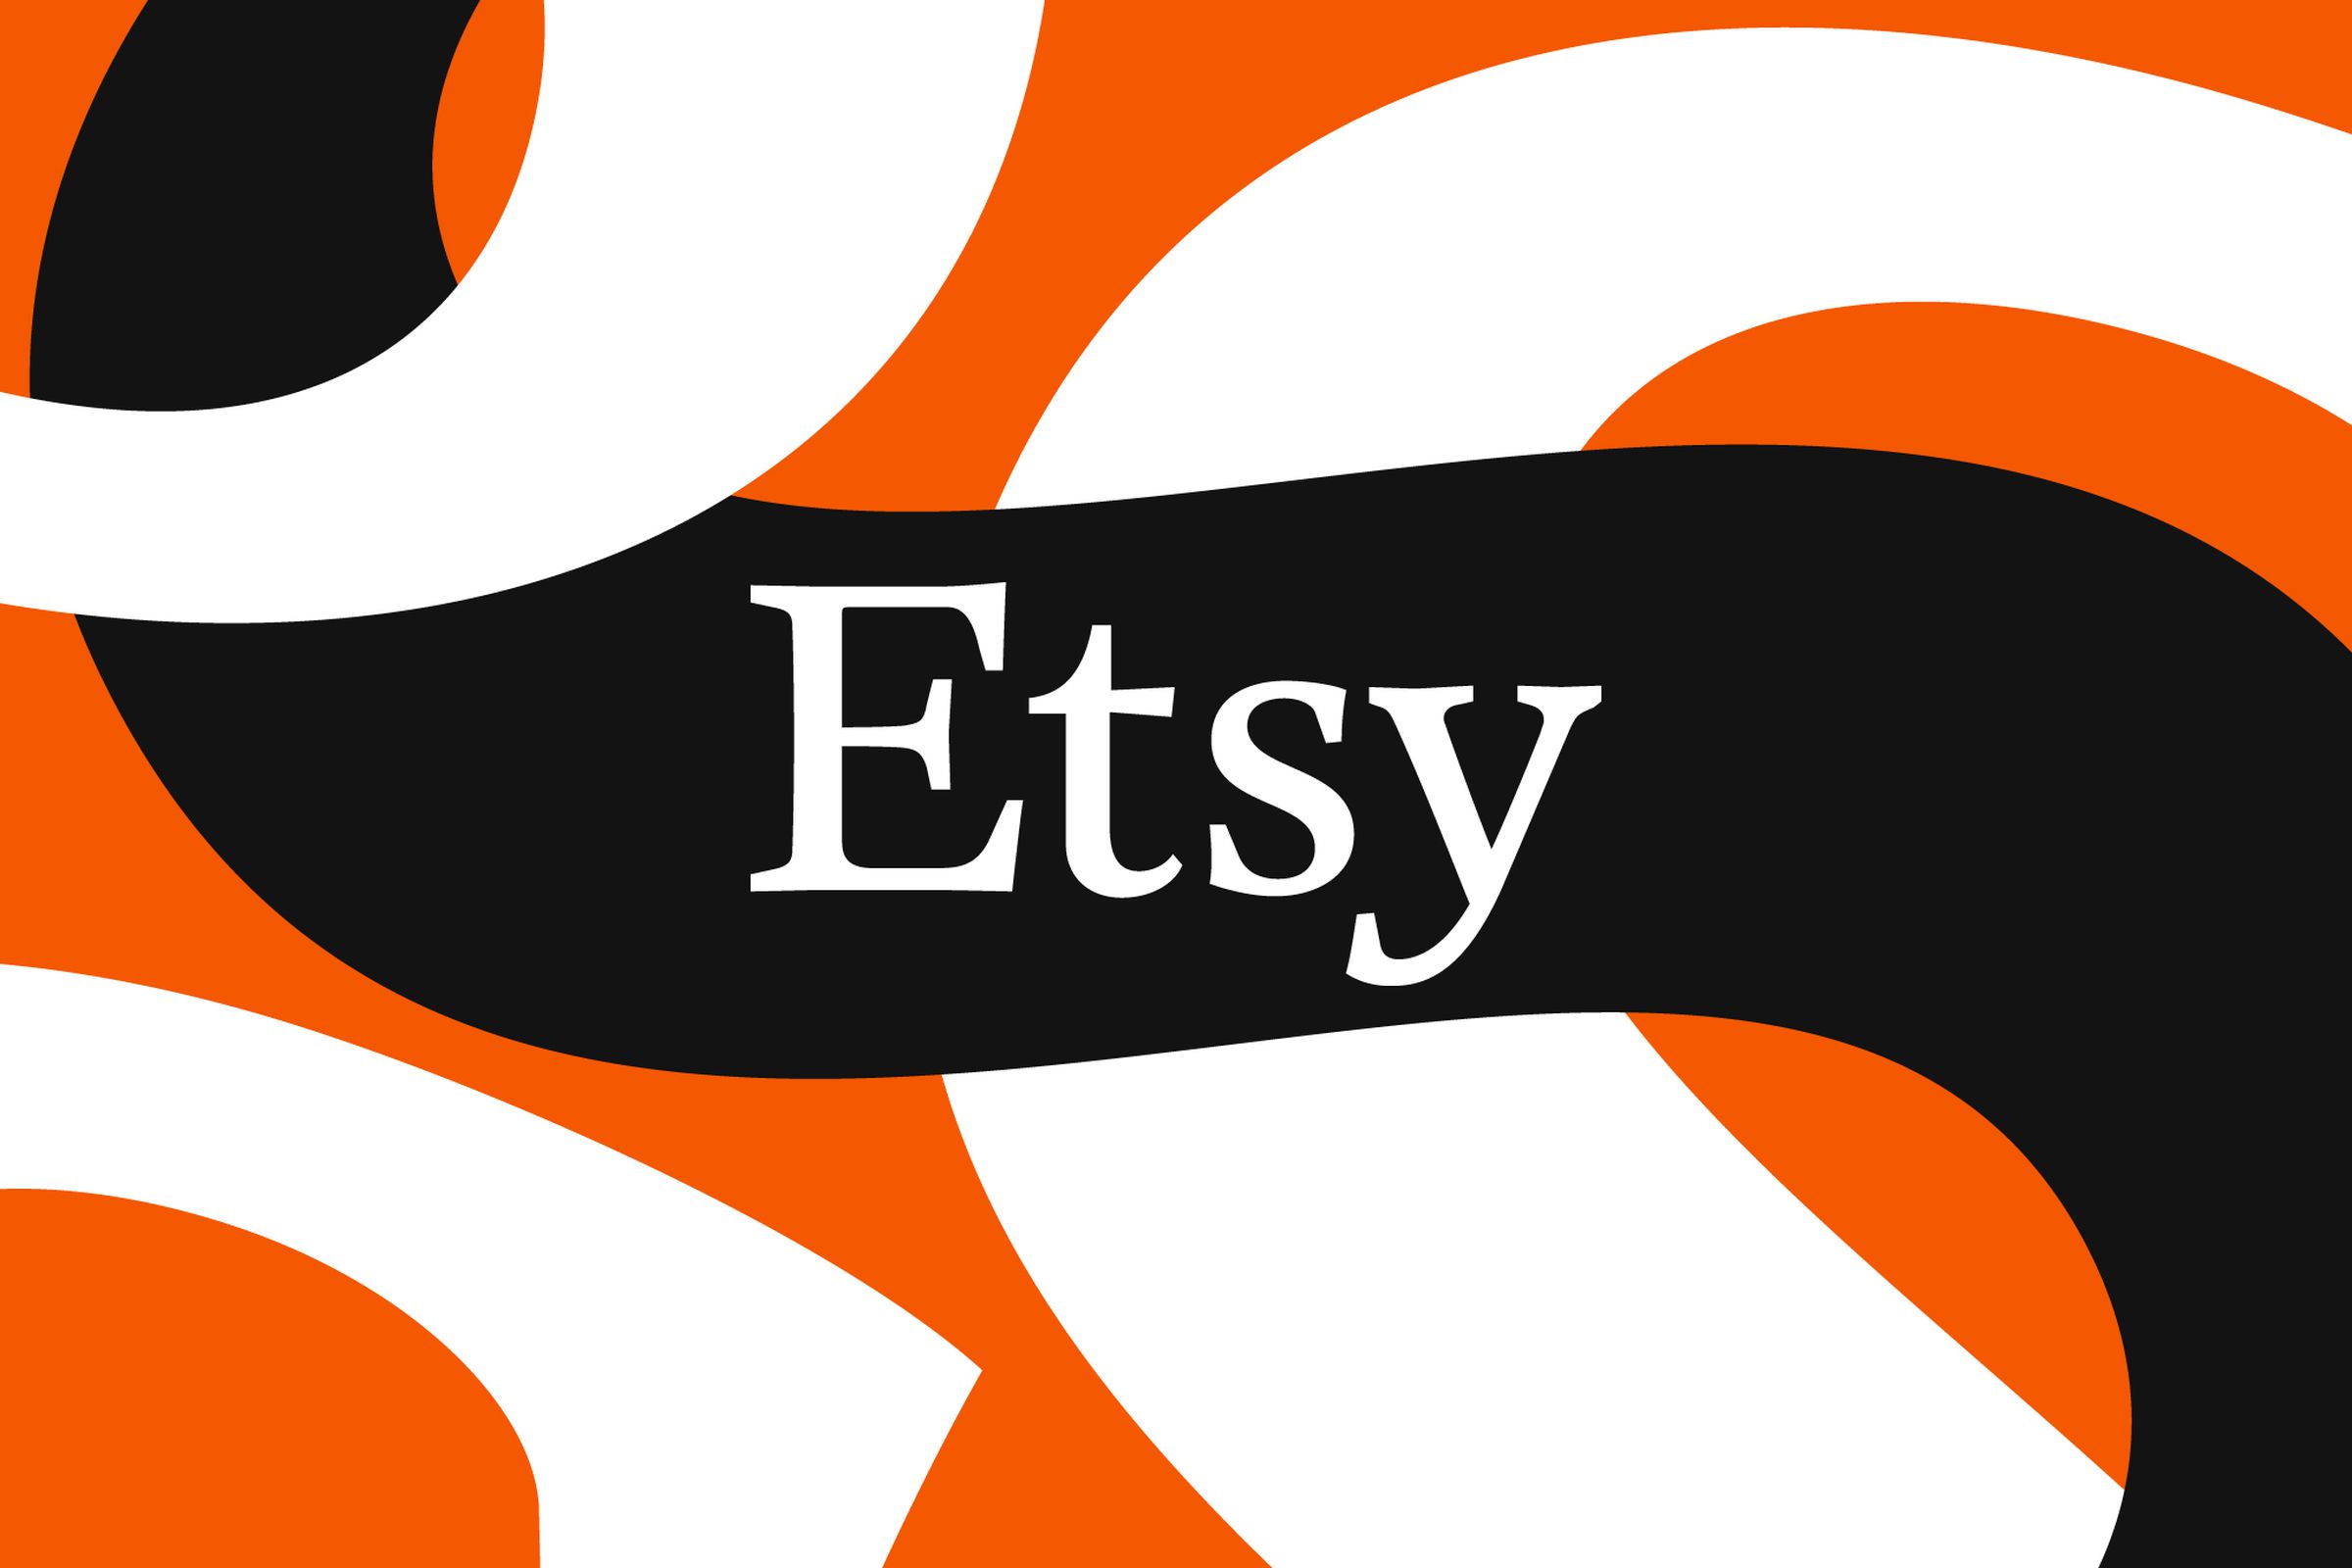 An image showing the Etsy logo